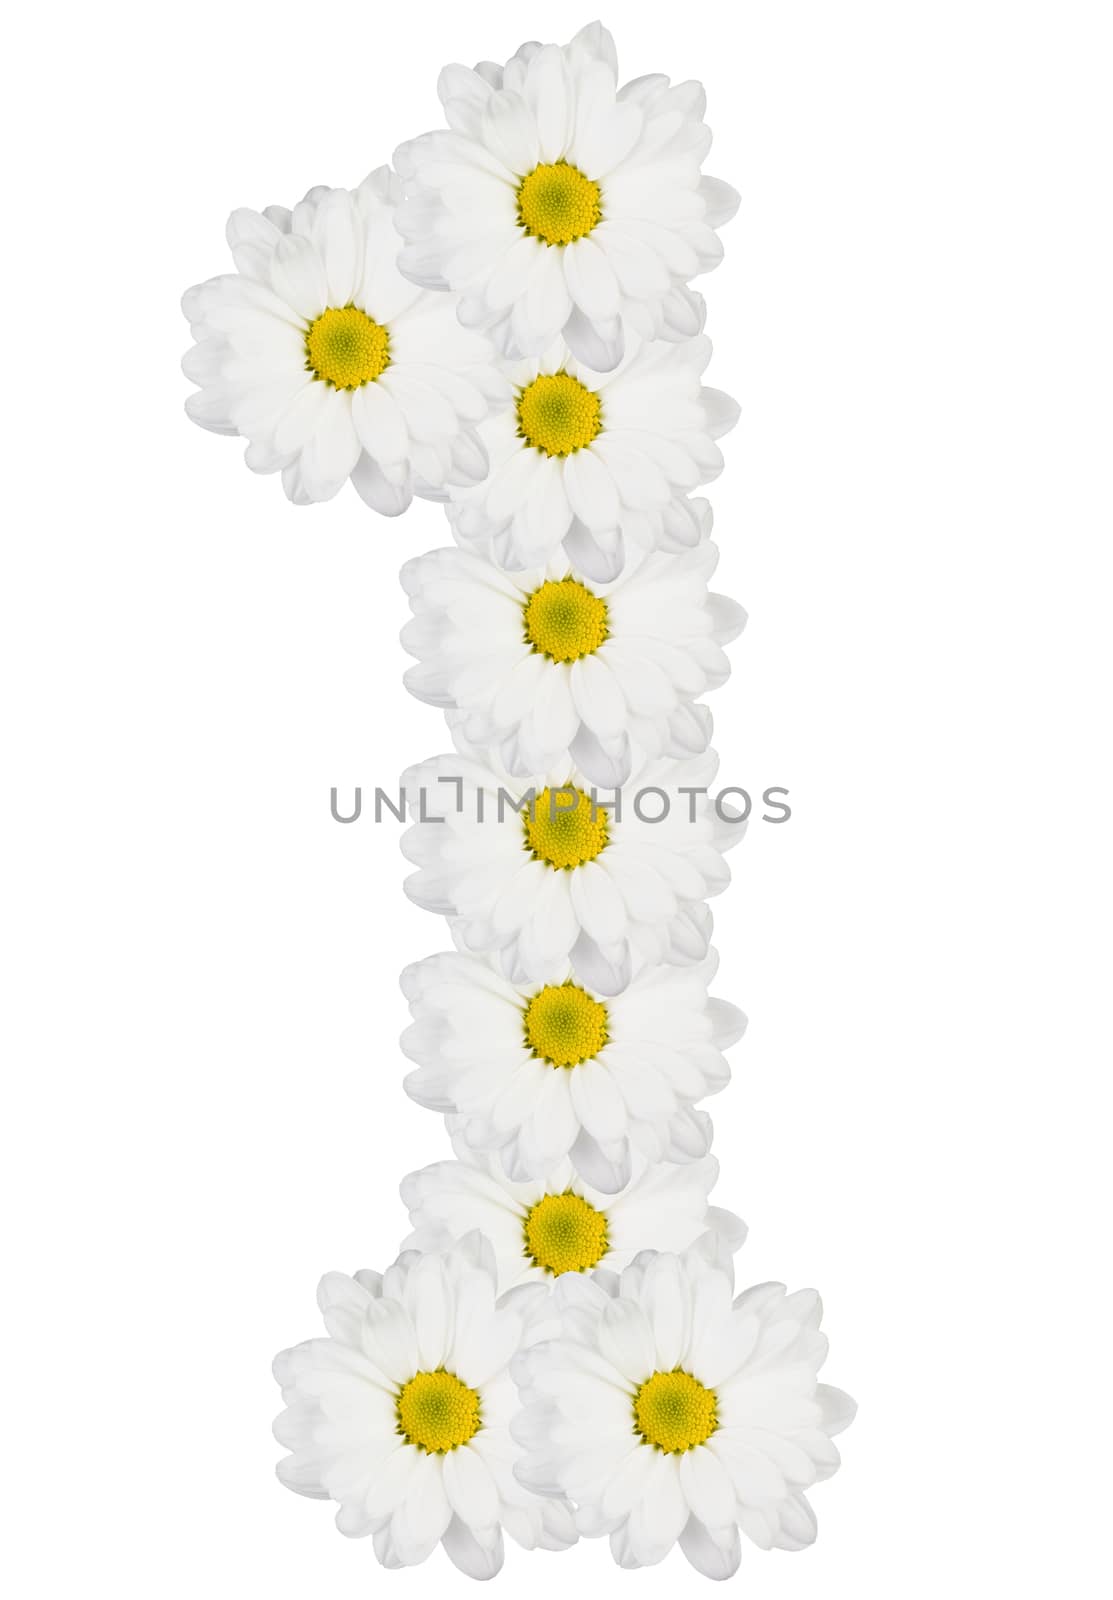 Number 1 made from white flowers